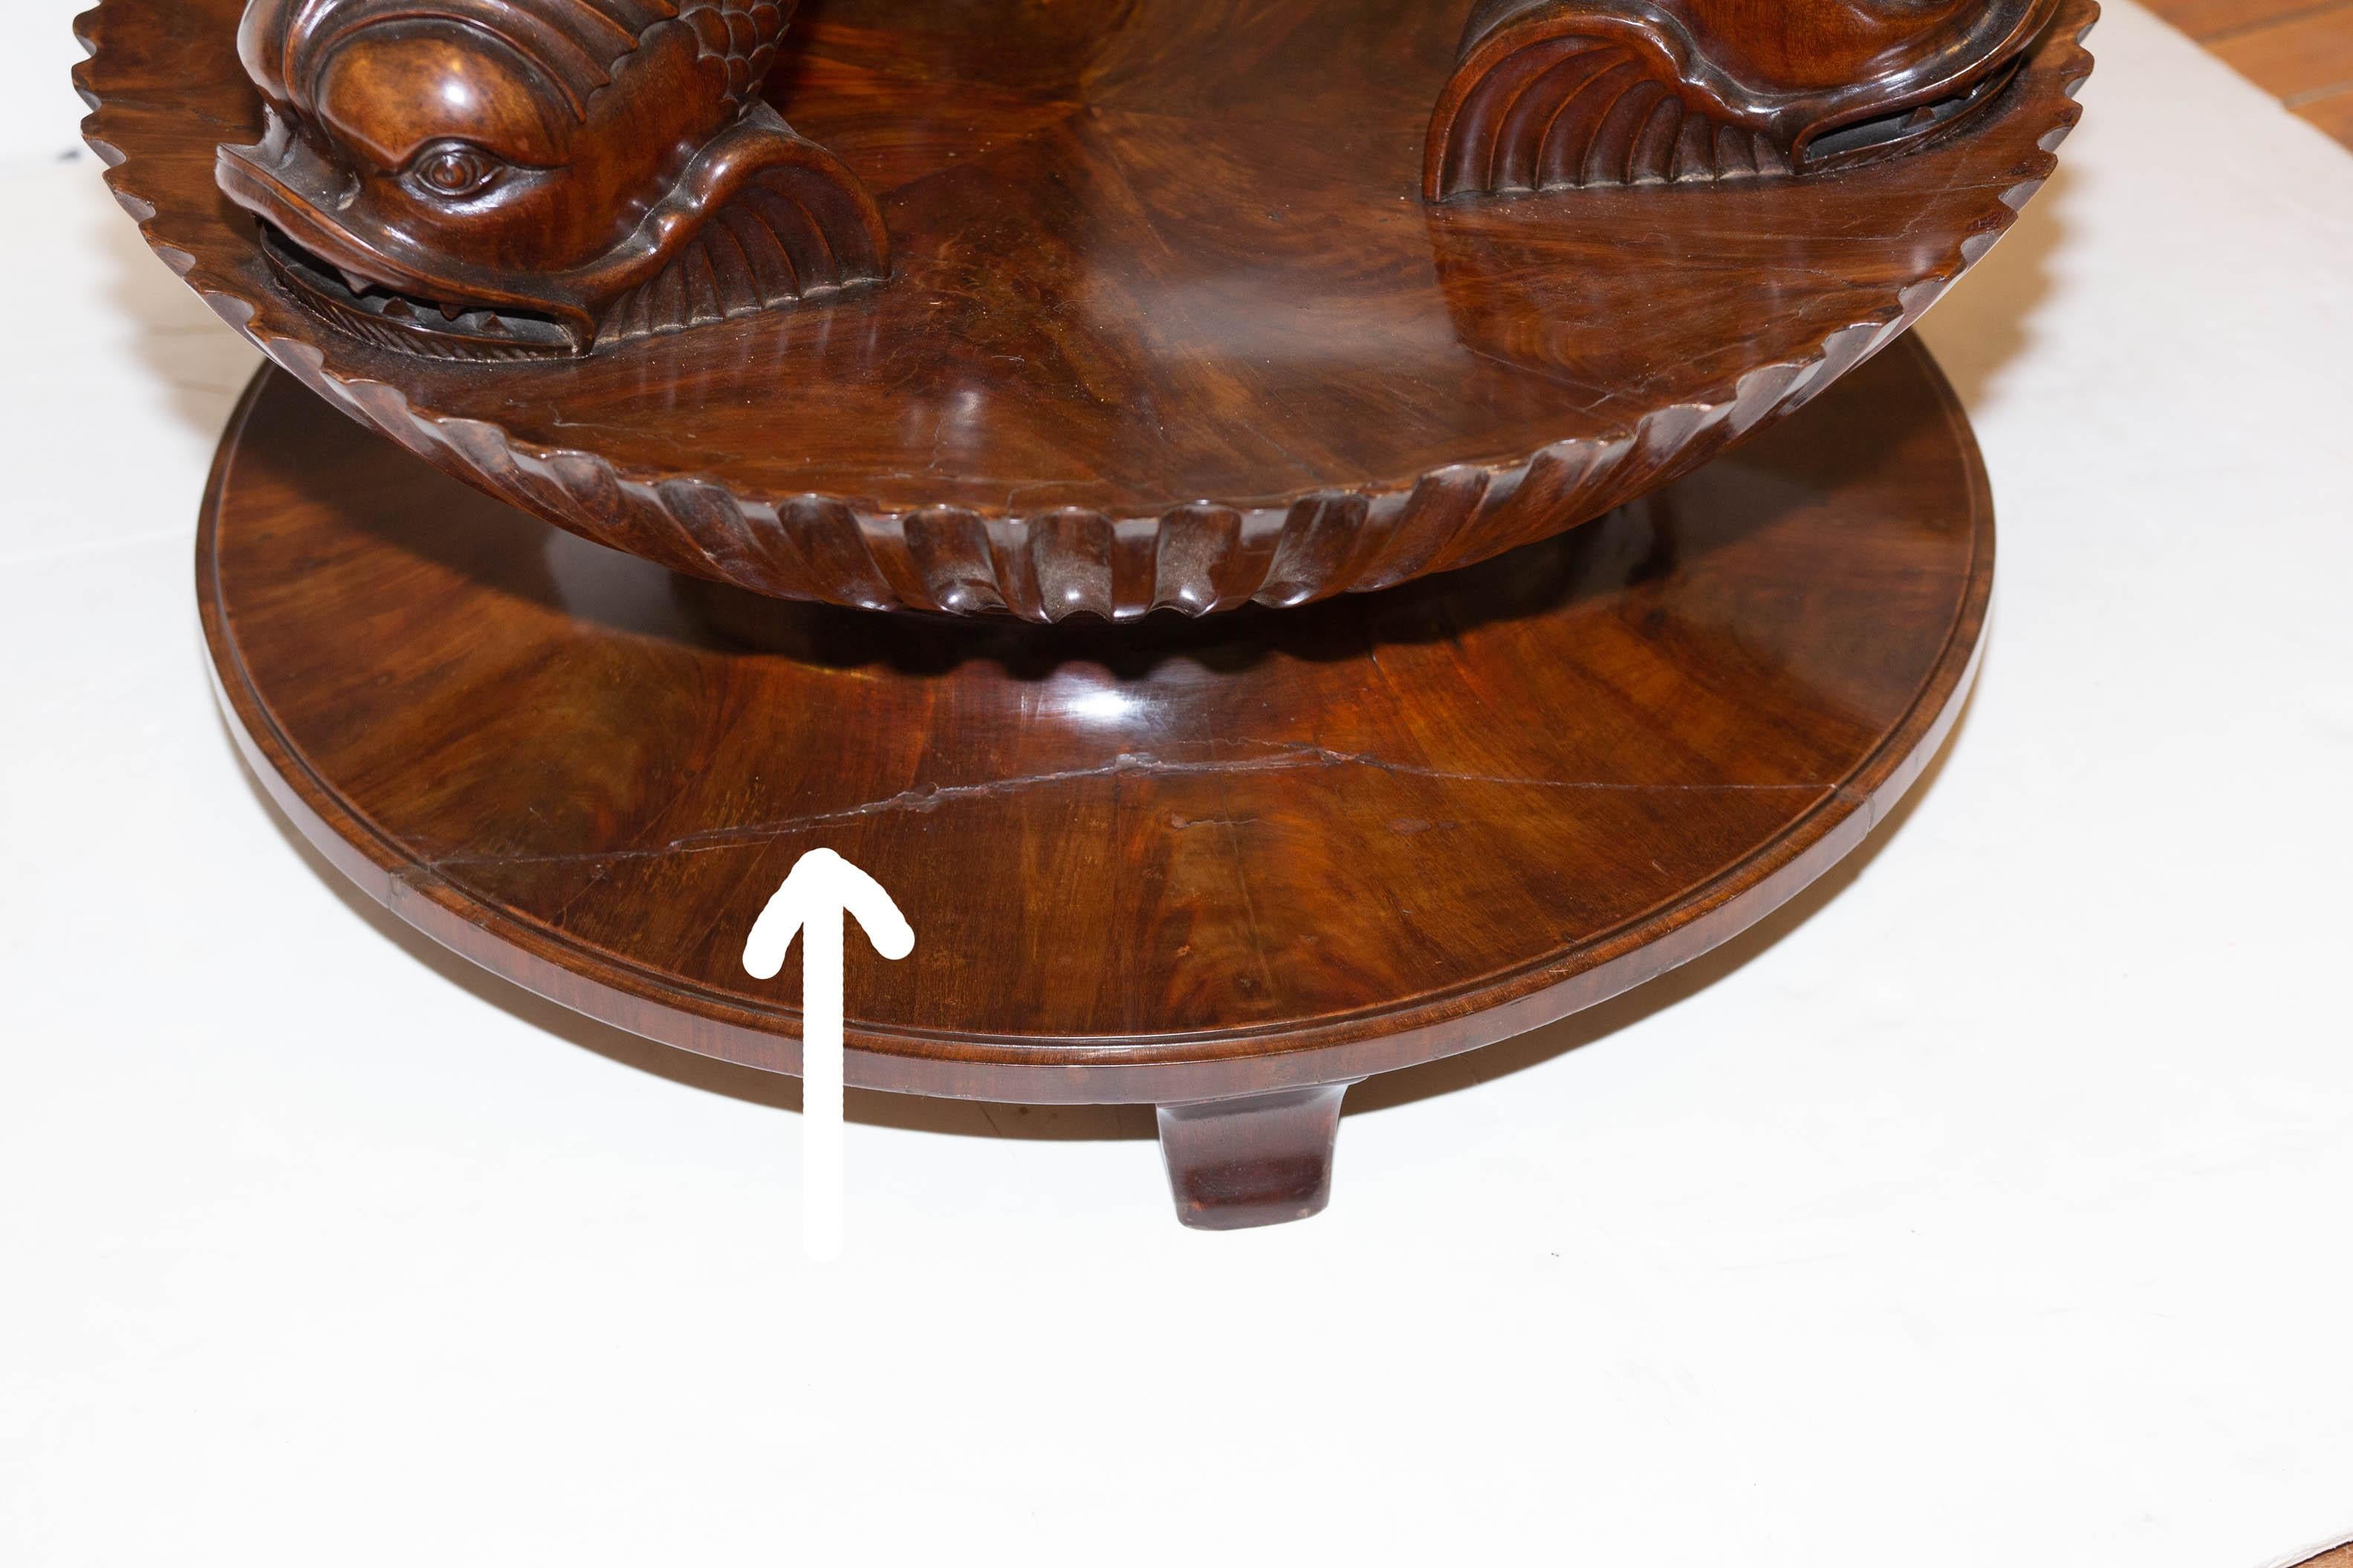 Antique Italian Neoclassical Sgagliola Table with Carved Dolphin Base circa 1810 For Sale 2